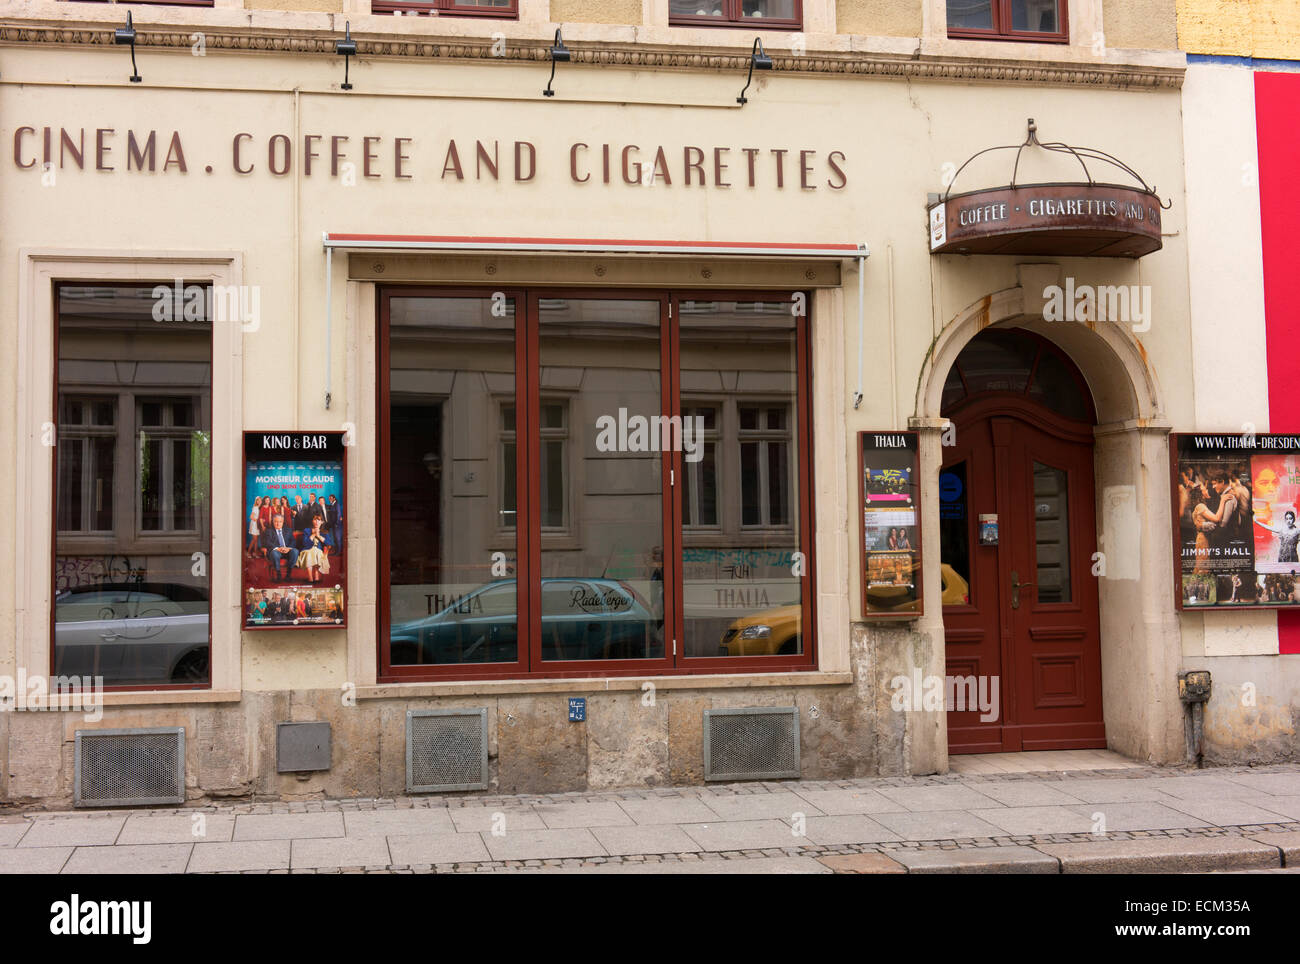 Thalia Cinema, Coffee and Cigarettes, a cafe bar in Dresden's new town. Stock Photo